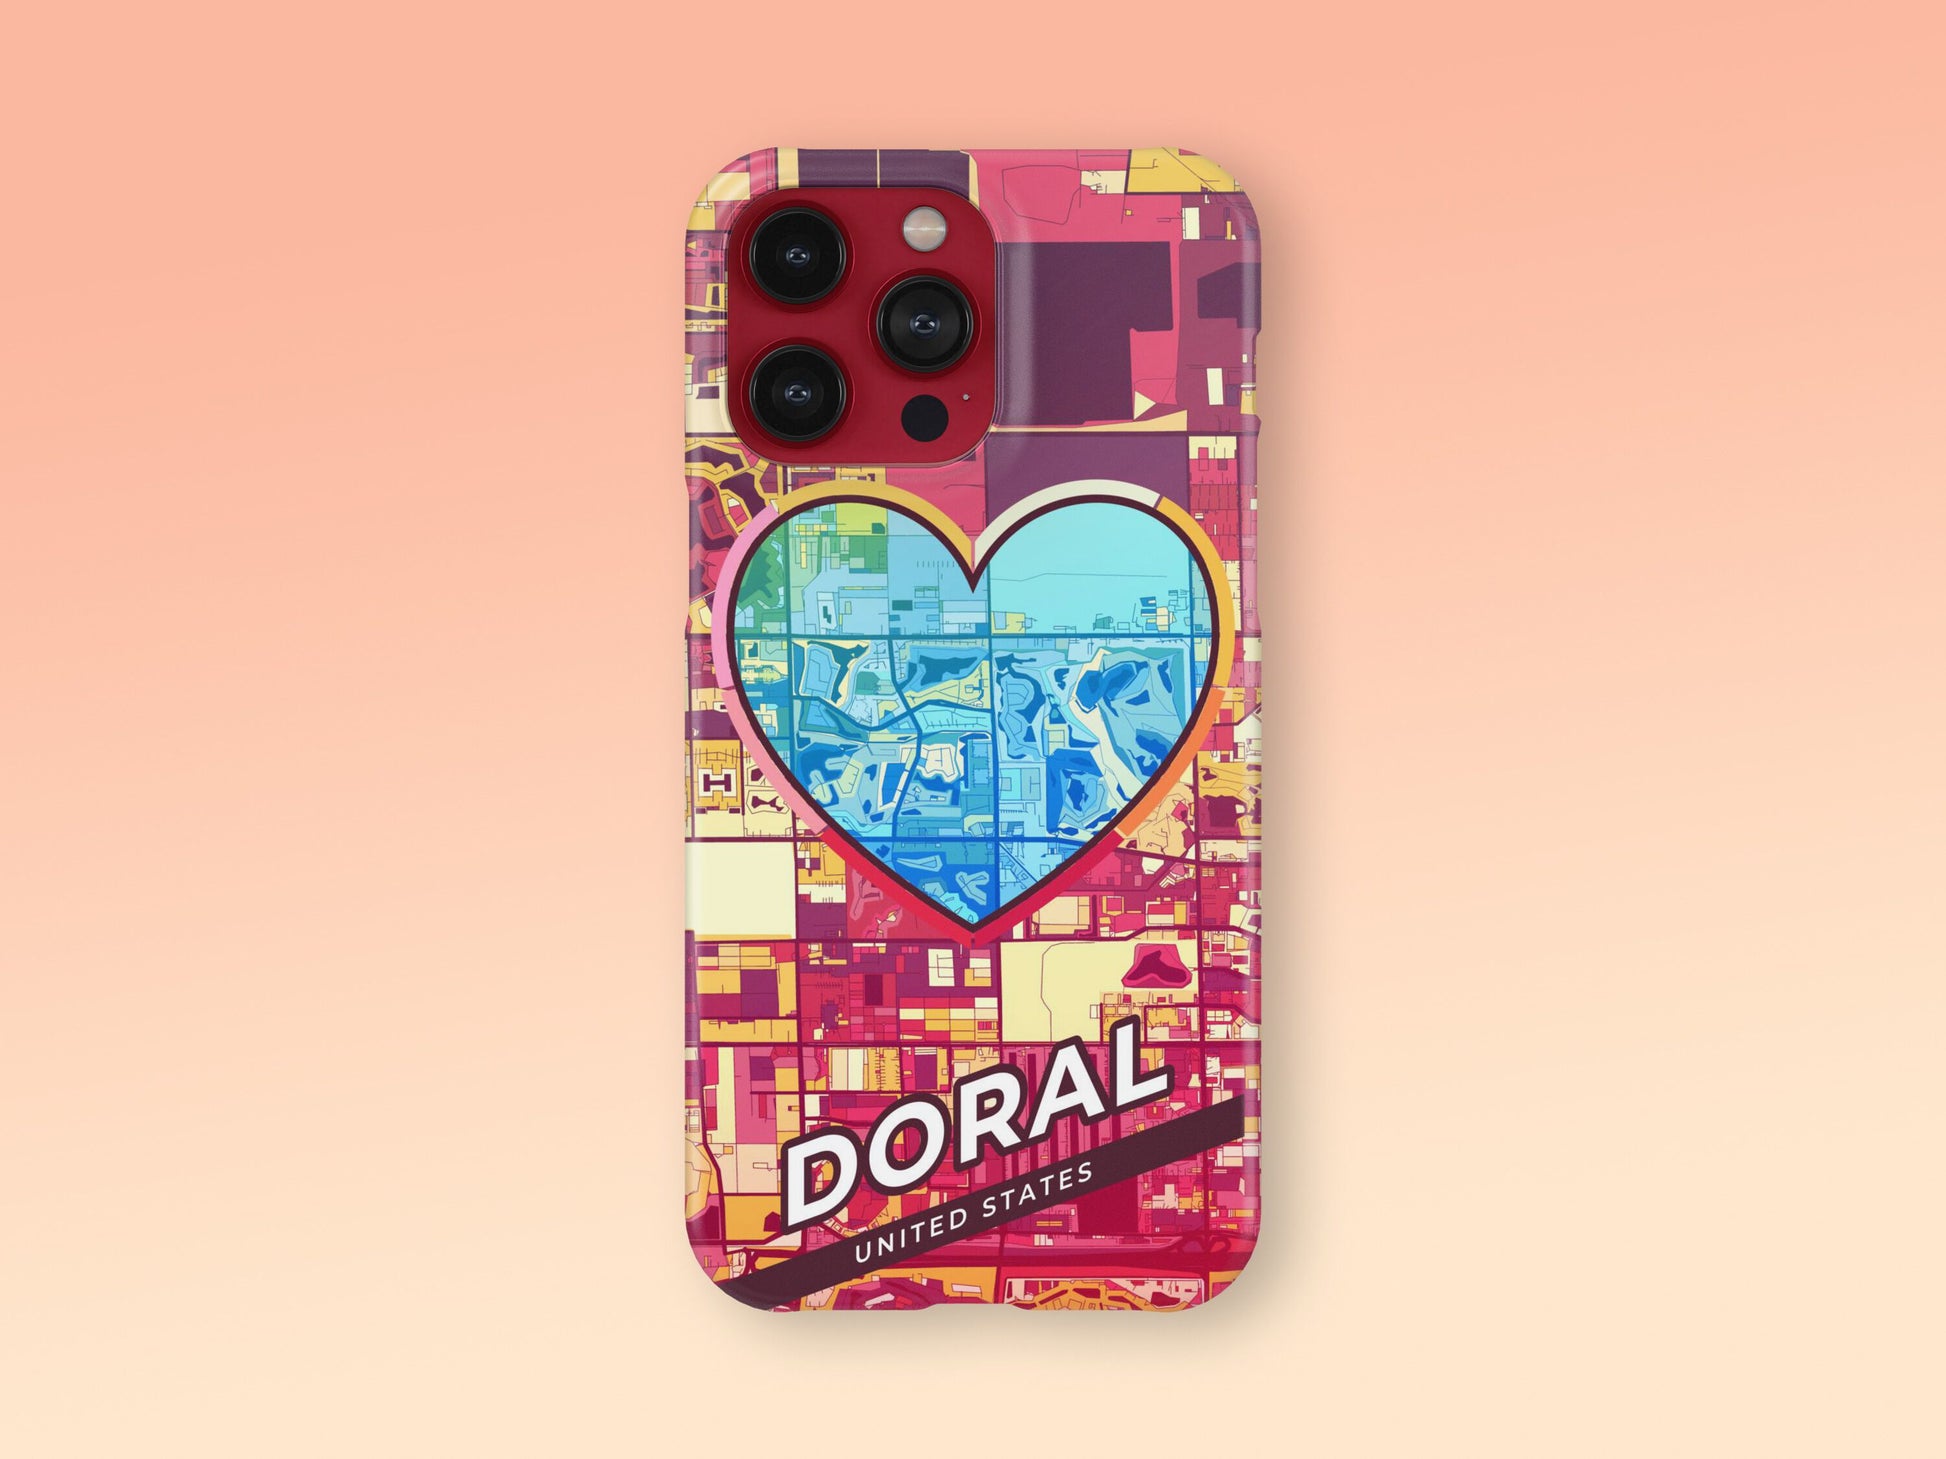 Doral Florida slim phone case with colorful icon. Birthday, wedding or housewarming gift. Couple match cases. 2